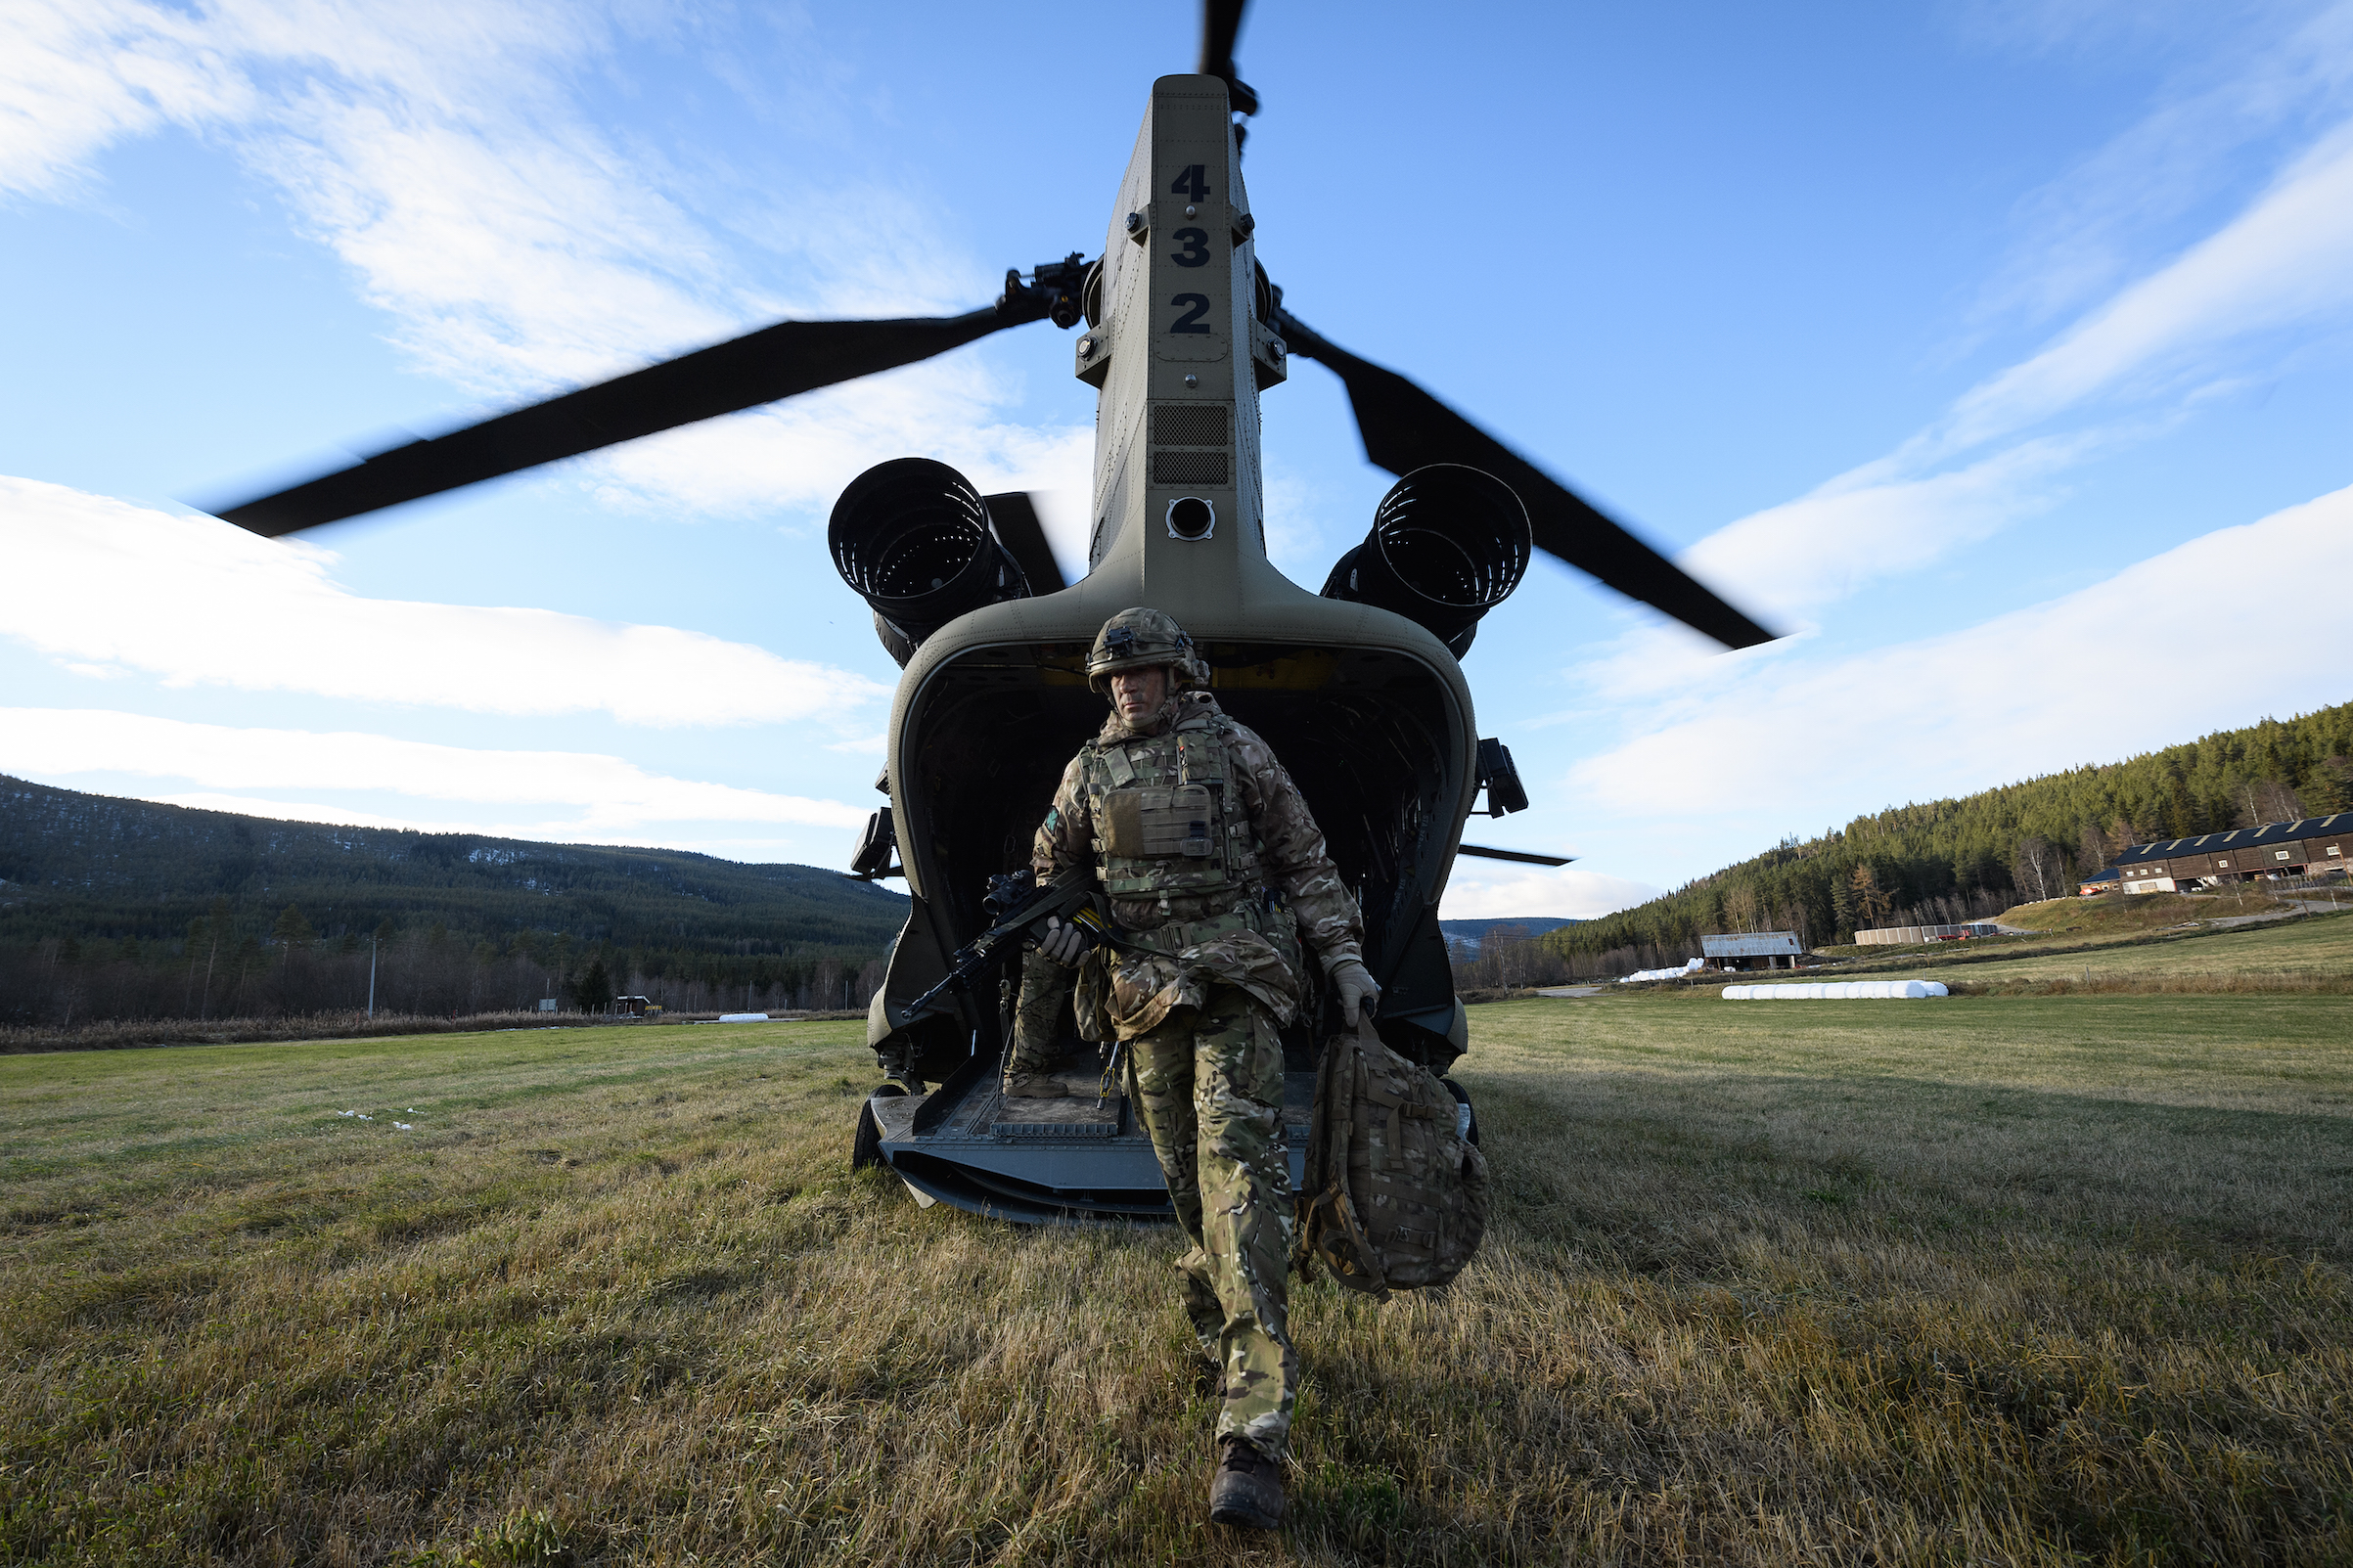 A British Army Brigade Commander disembarks from a United States Army Chinook CH-47 helicopter during a reconnaissance mission ahead of live exercise, on Oct. 27, 2018 in Alvdal, Norway. Over 40,000 participants from 31 nations will take part in the NATO "Trident Juncture" exercise, the largest exercise of it's kind to be held in Norway since the 1980s. (Leon Neal—Getty Images)